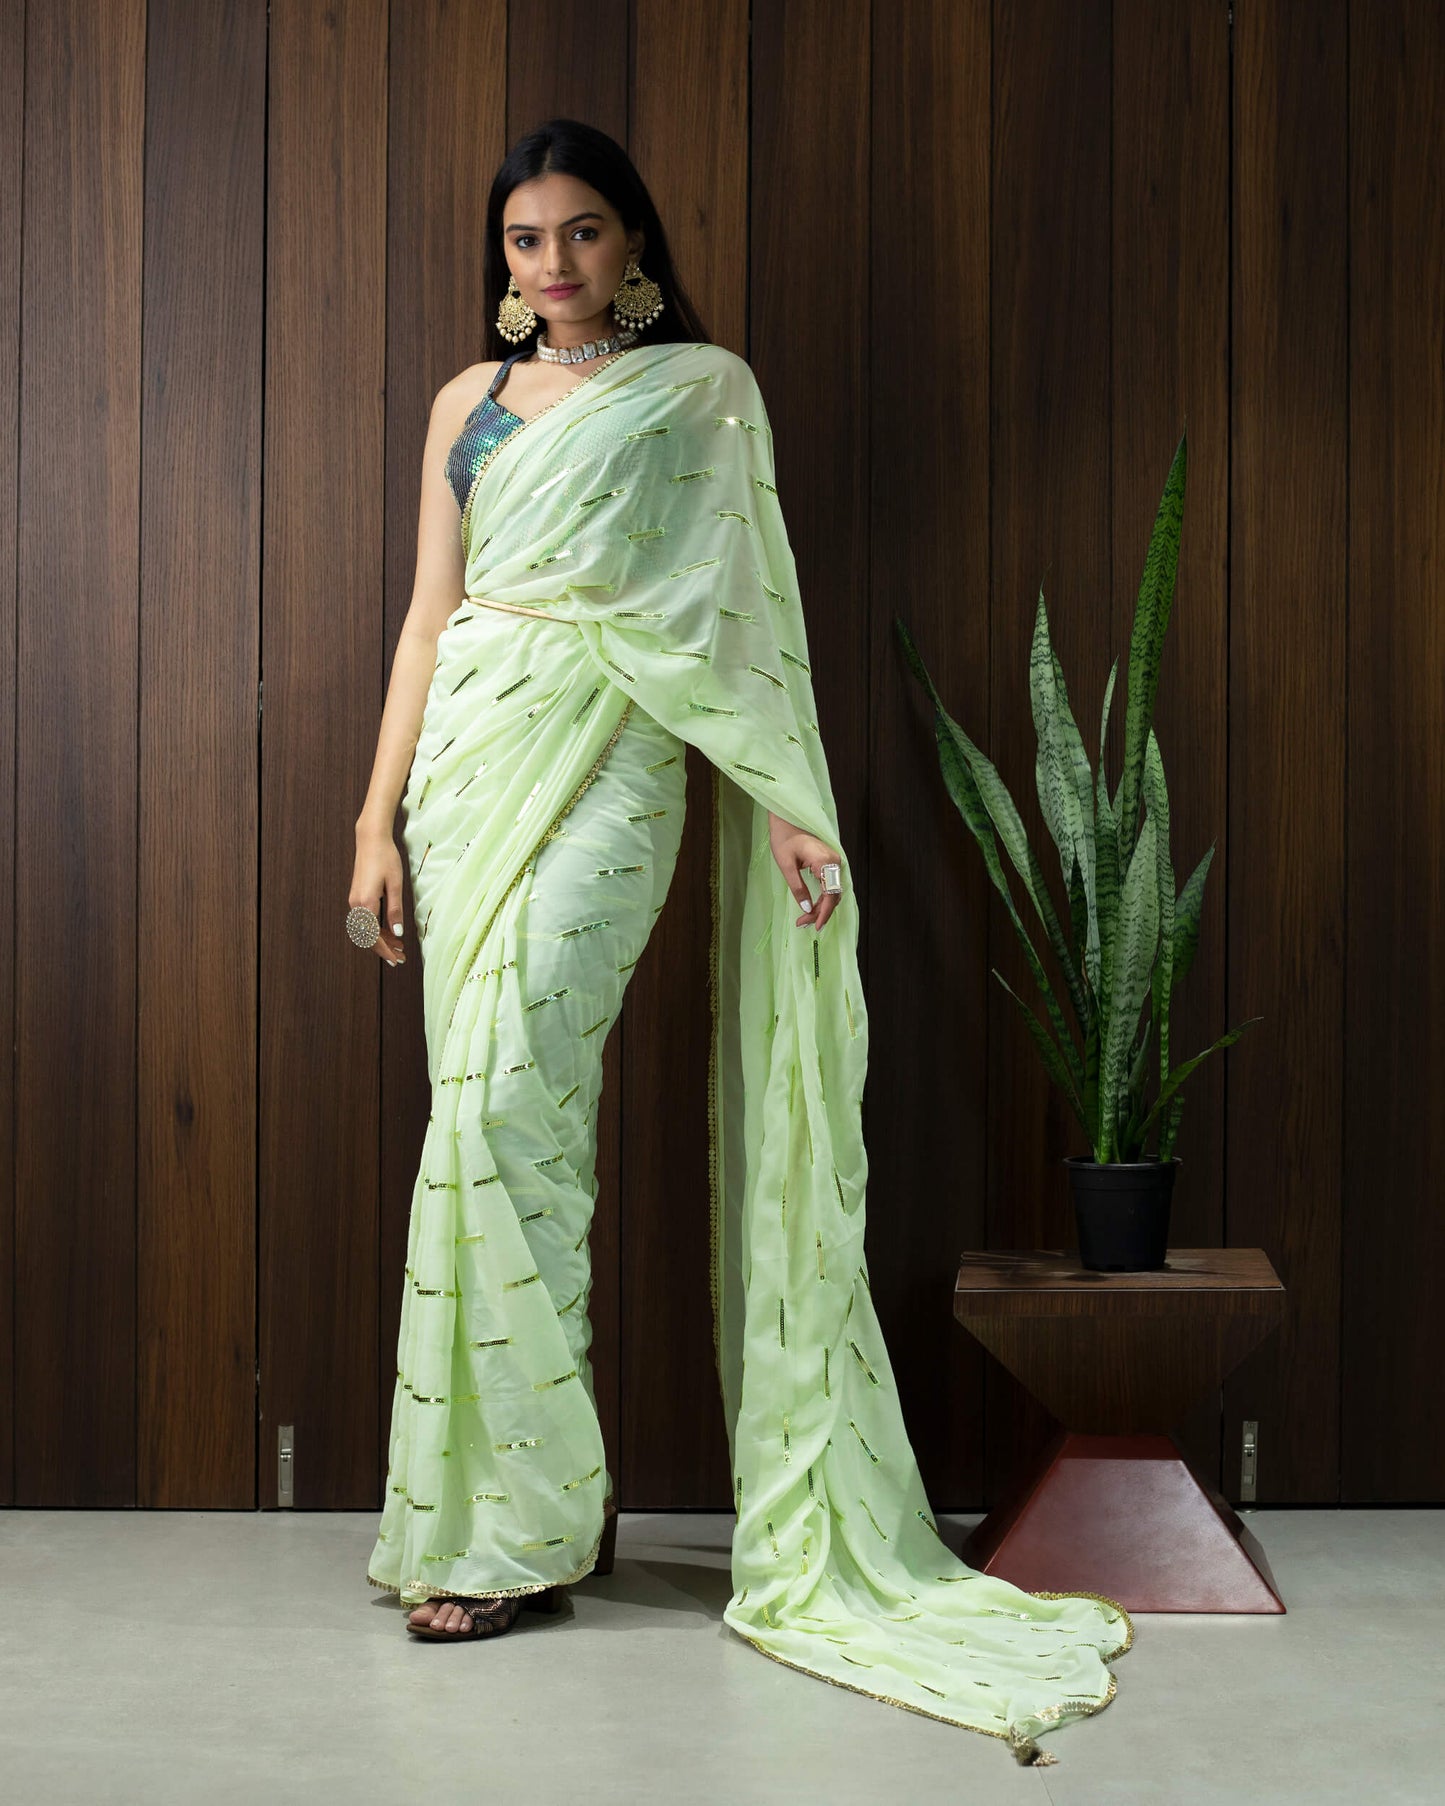 Tea Green Stripes Patten Sequins Embroidery Georgette Pre-Draped Saree With Tubular Beads Sequins Lace